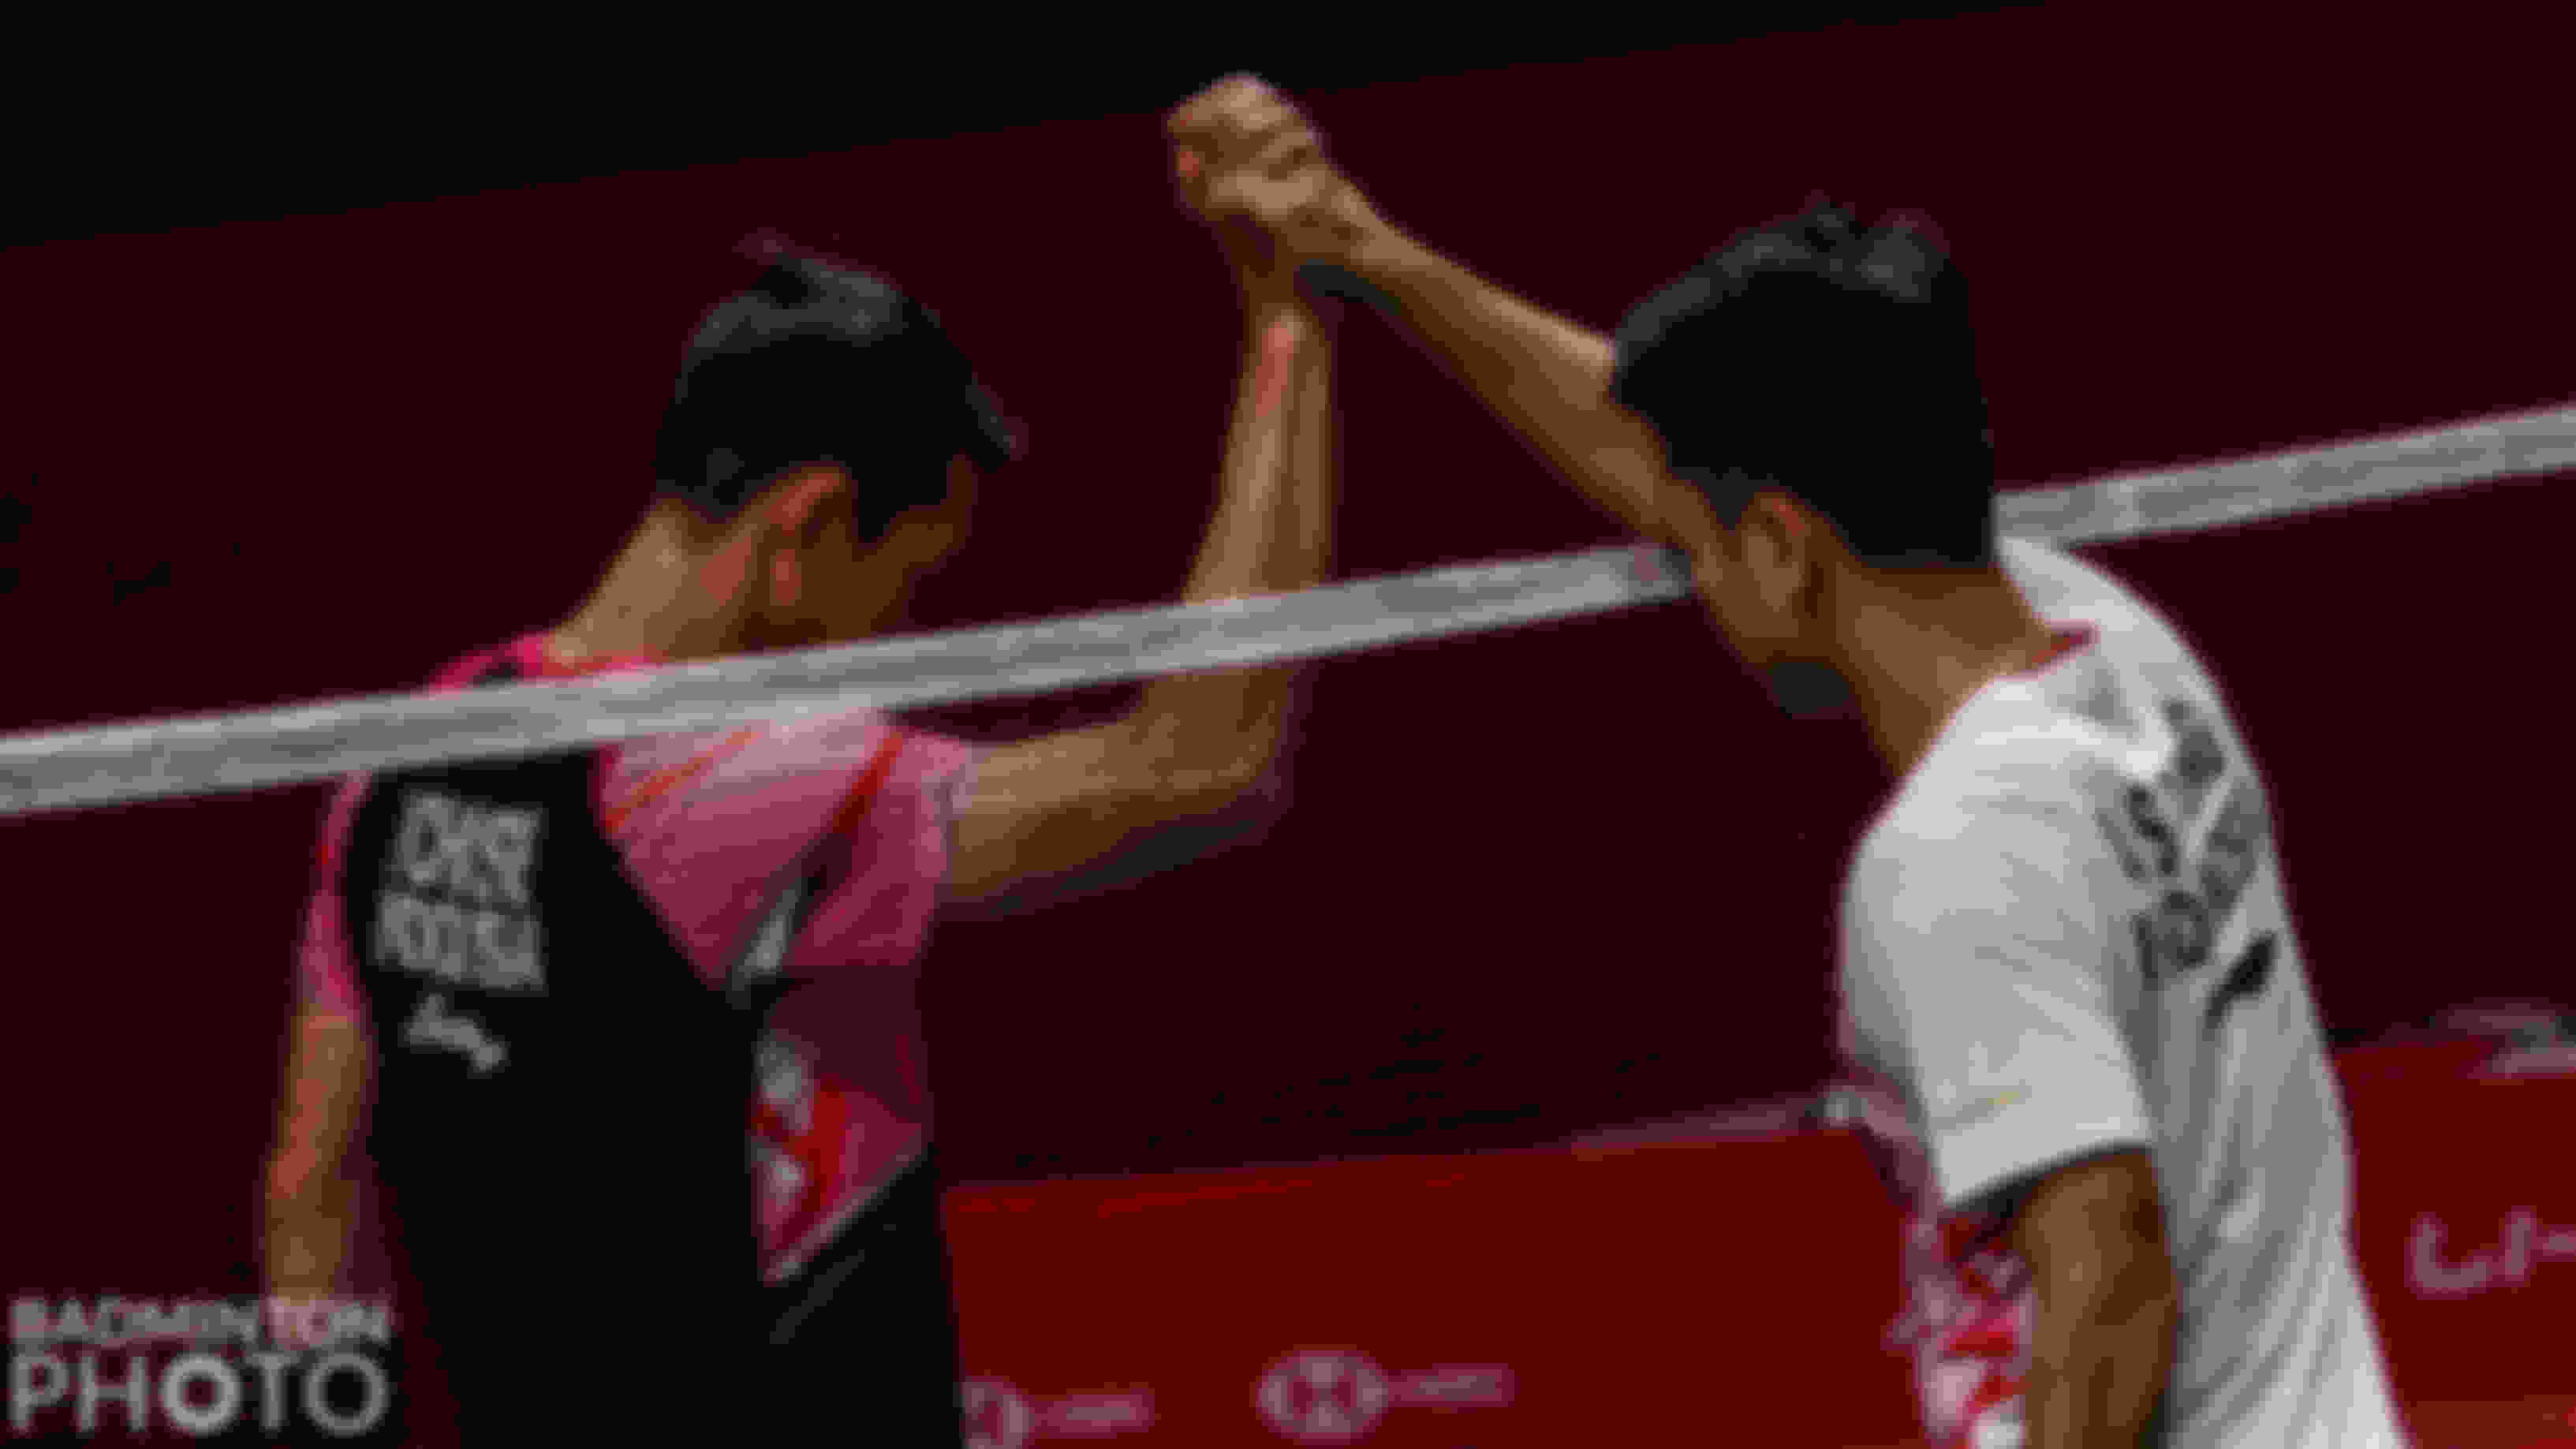 On this day, Anthony Sinisuka Ginting beat his friend and compatriot Jonathan Christie.